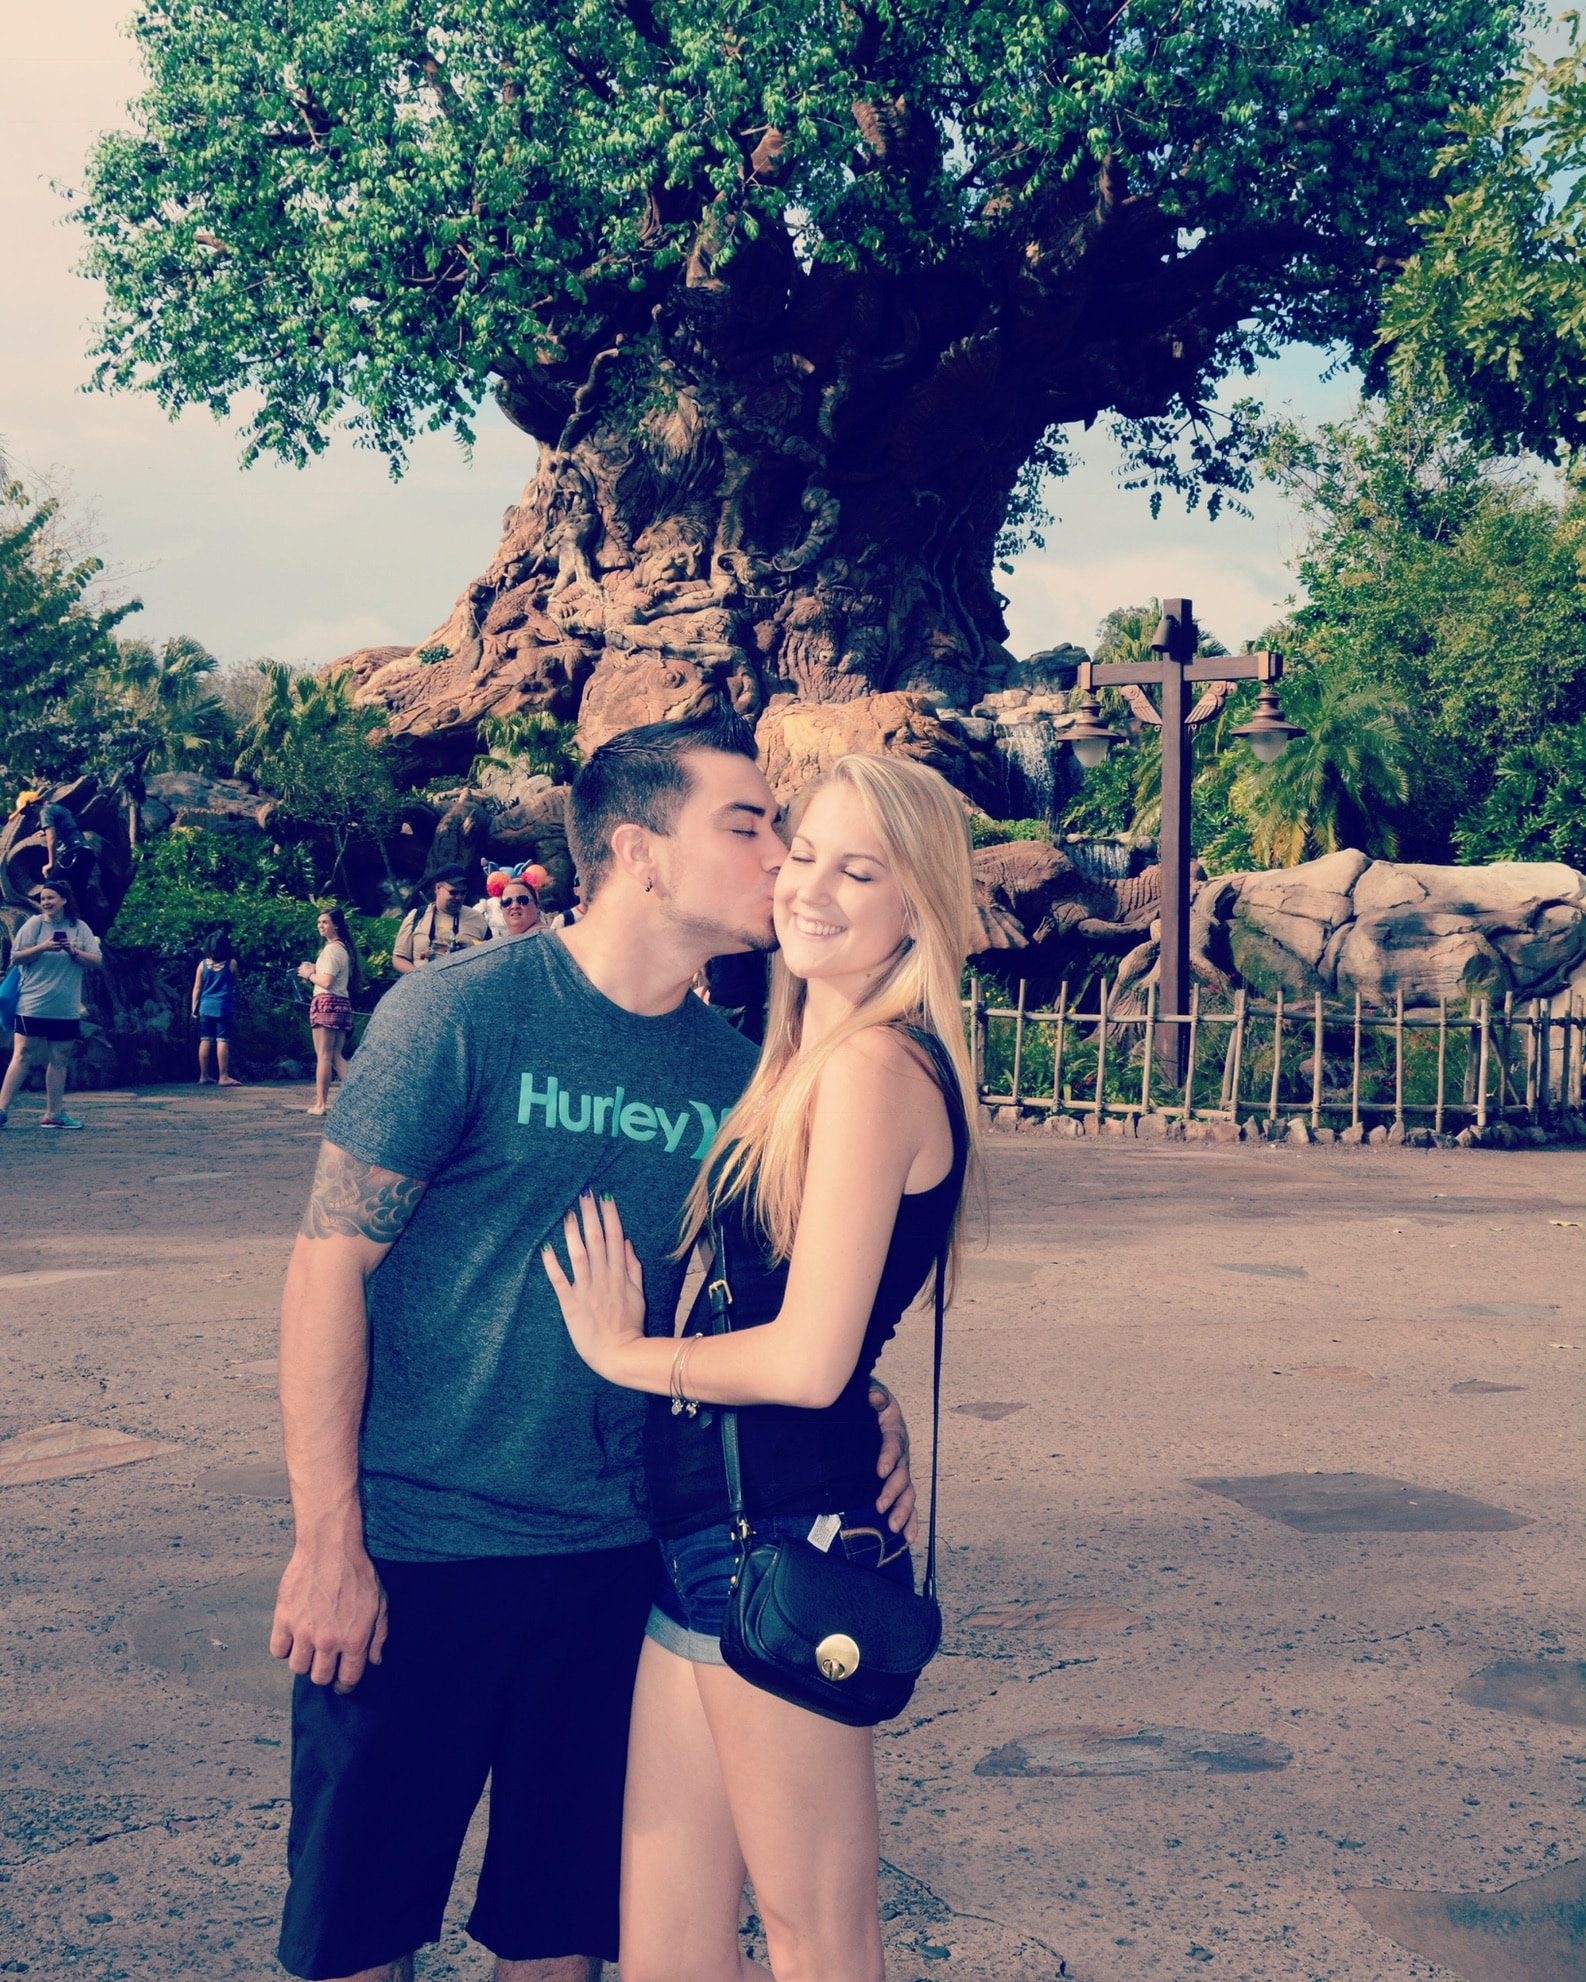 bride-to-be smiling while groom-to-be kisses her on the cheek at disney's animal kingdom in front of the tree of life.